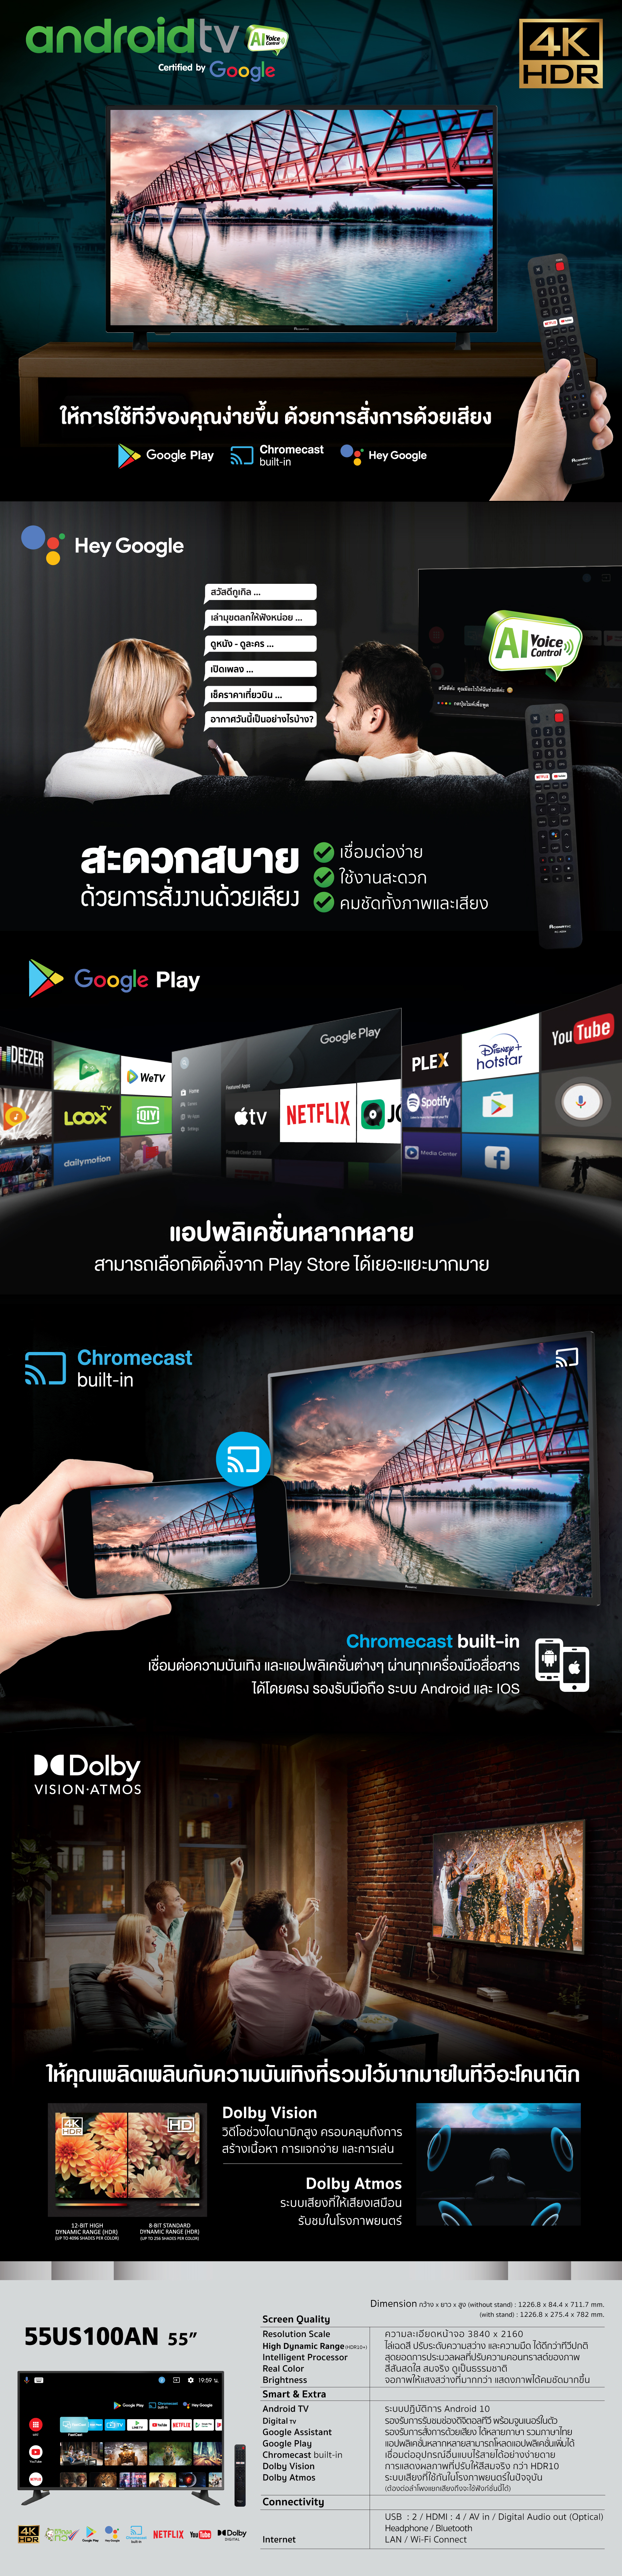 Android TV 55" model 55US100AN